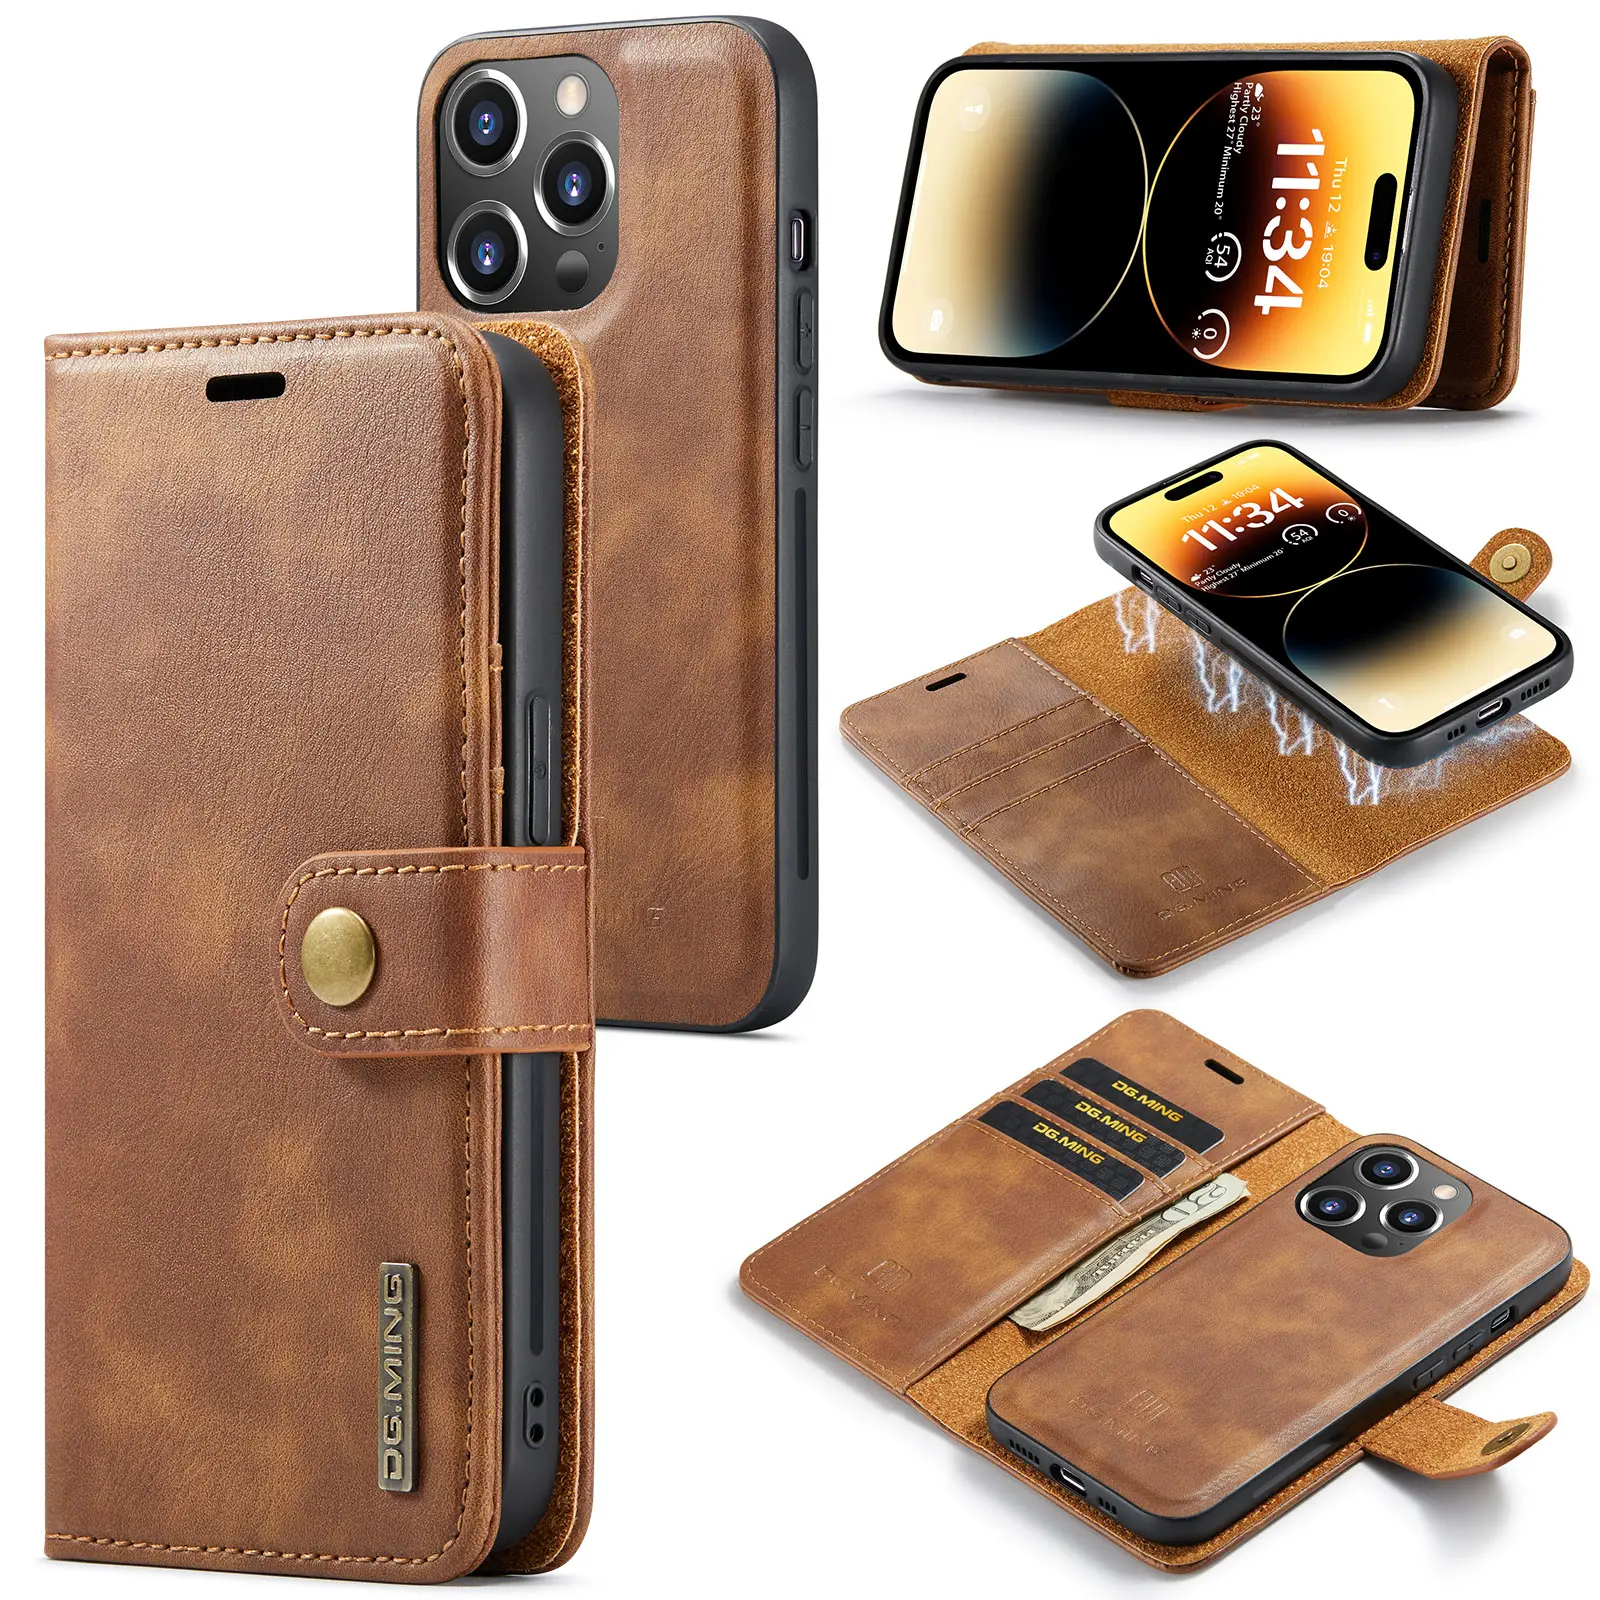 Flip leather Magnetic Phone Case for iPhone xr xsmax 6s 7 8 plus 2 in 1 Manufacturer Mobile for iPhone 14 13 12 11 promax 13mini